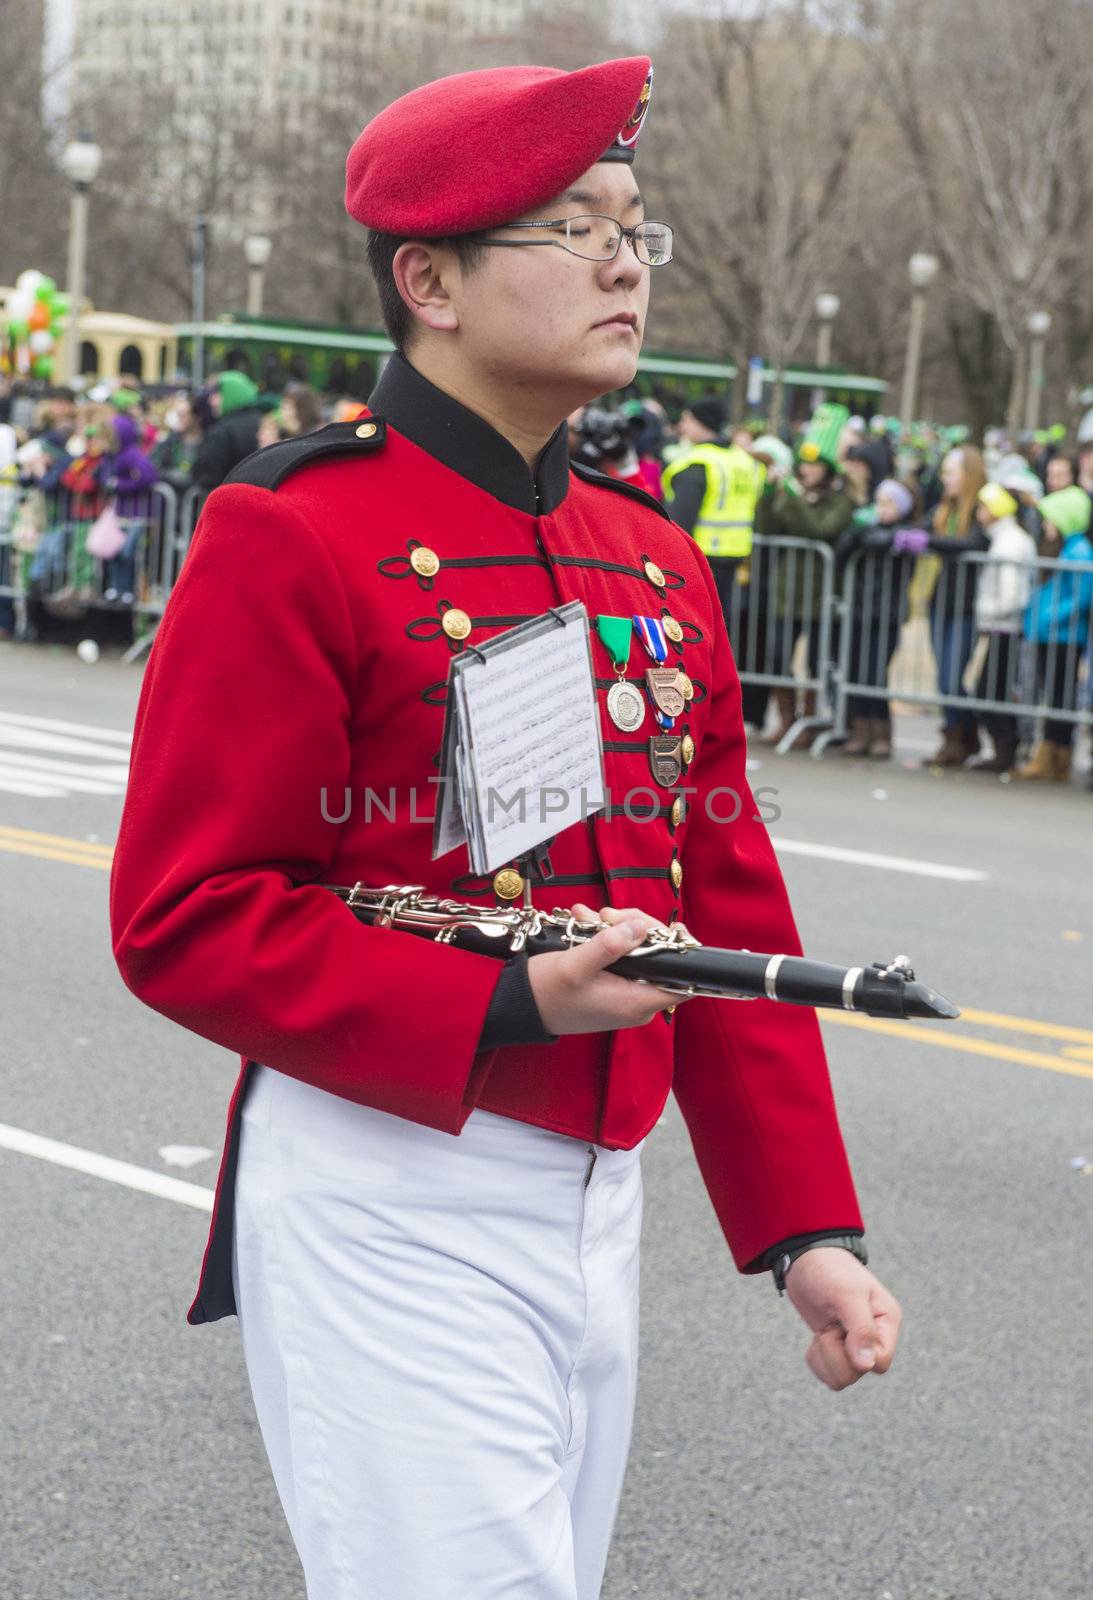 CHICAGO - MARCH 16 : Band member marching at the annual Saint Patrick's Day Parade in Chicago on March 16 2013